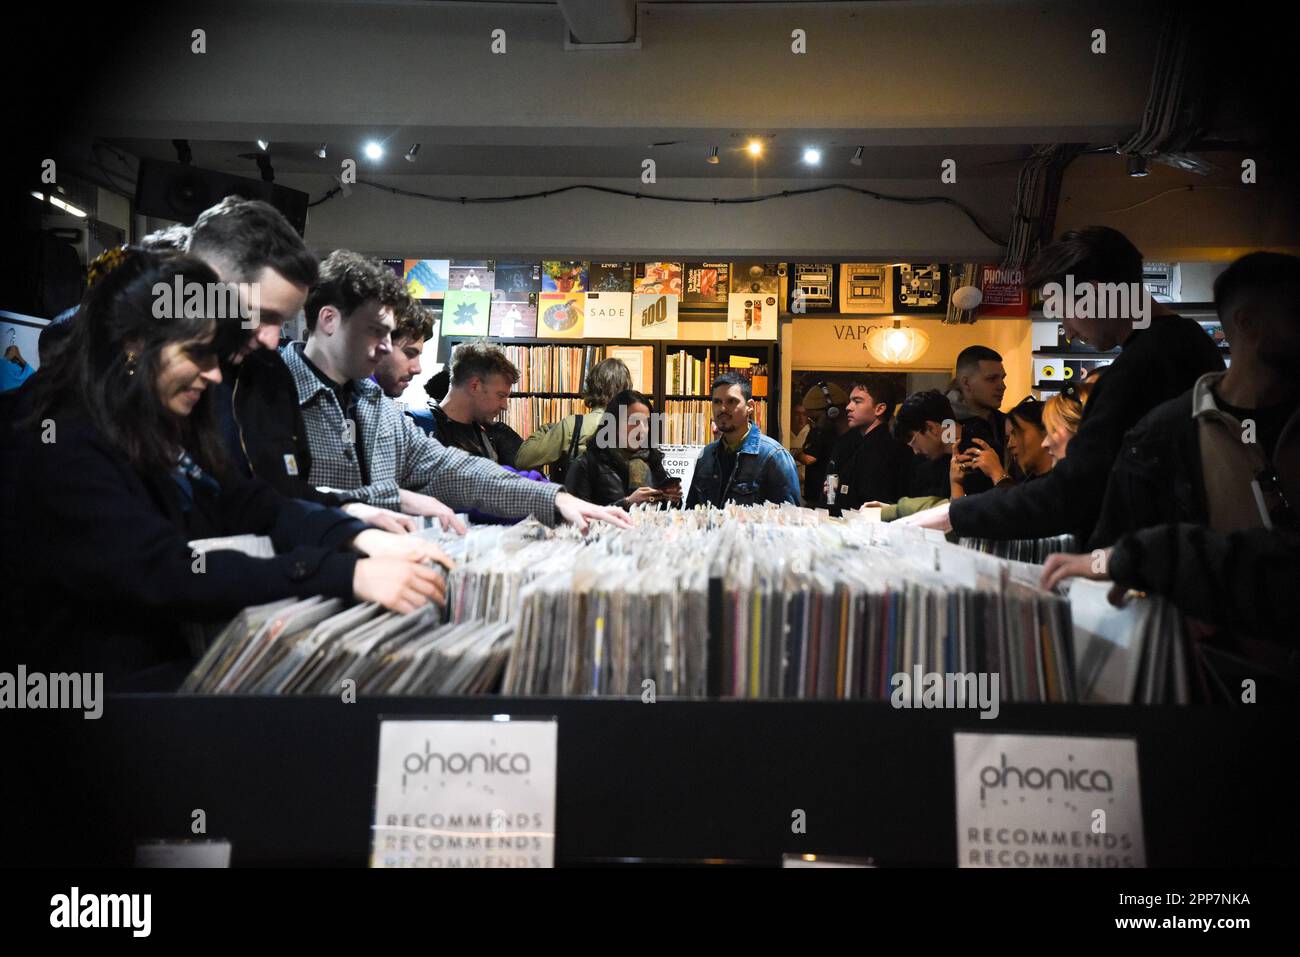 London, UK. 22nd Apr, 2023. Record Store Day is the one day of the year when over 260 independent record shops all across the UK come together to celebrate their unique culture. Phonica (& Vinyl Factory) is an independent British company that collaborates with musicians and artists to create ultra-premium handmade limited editions exclusively for the day and many shops and cities host artist performances and events to mark the occasion. Thousands more shops celebrate the day around the globe in what's become one of the biggest annual events on the music calendar. Credit: Kingsley Davis/Alamy L Stock Photo